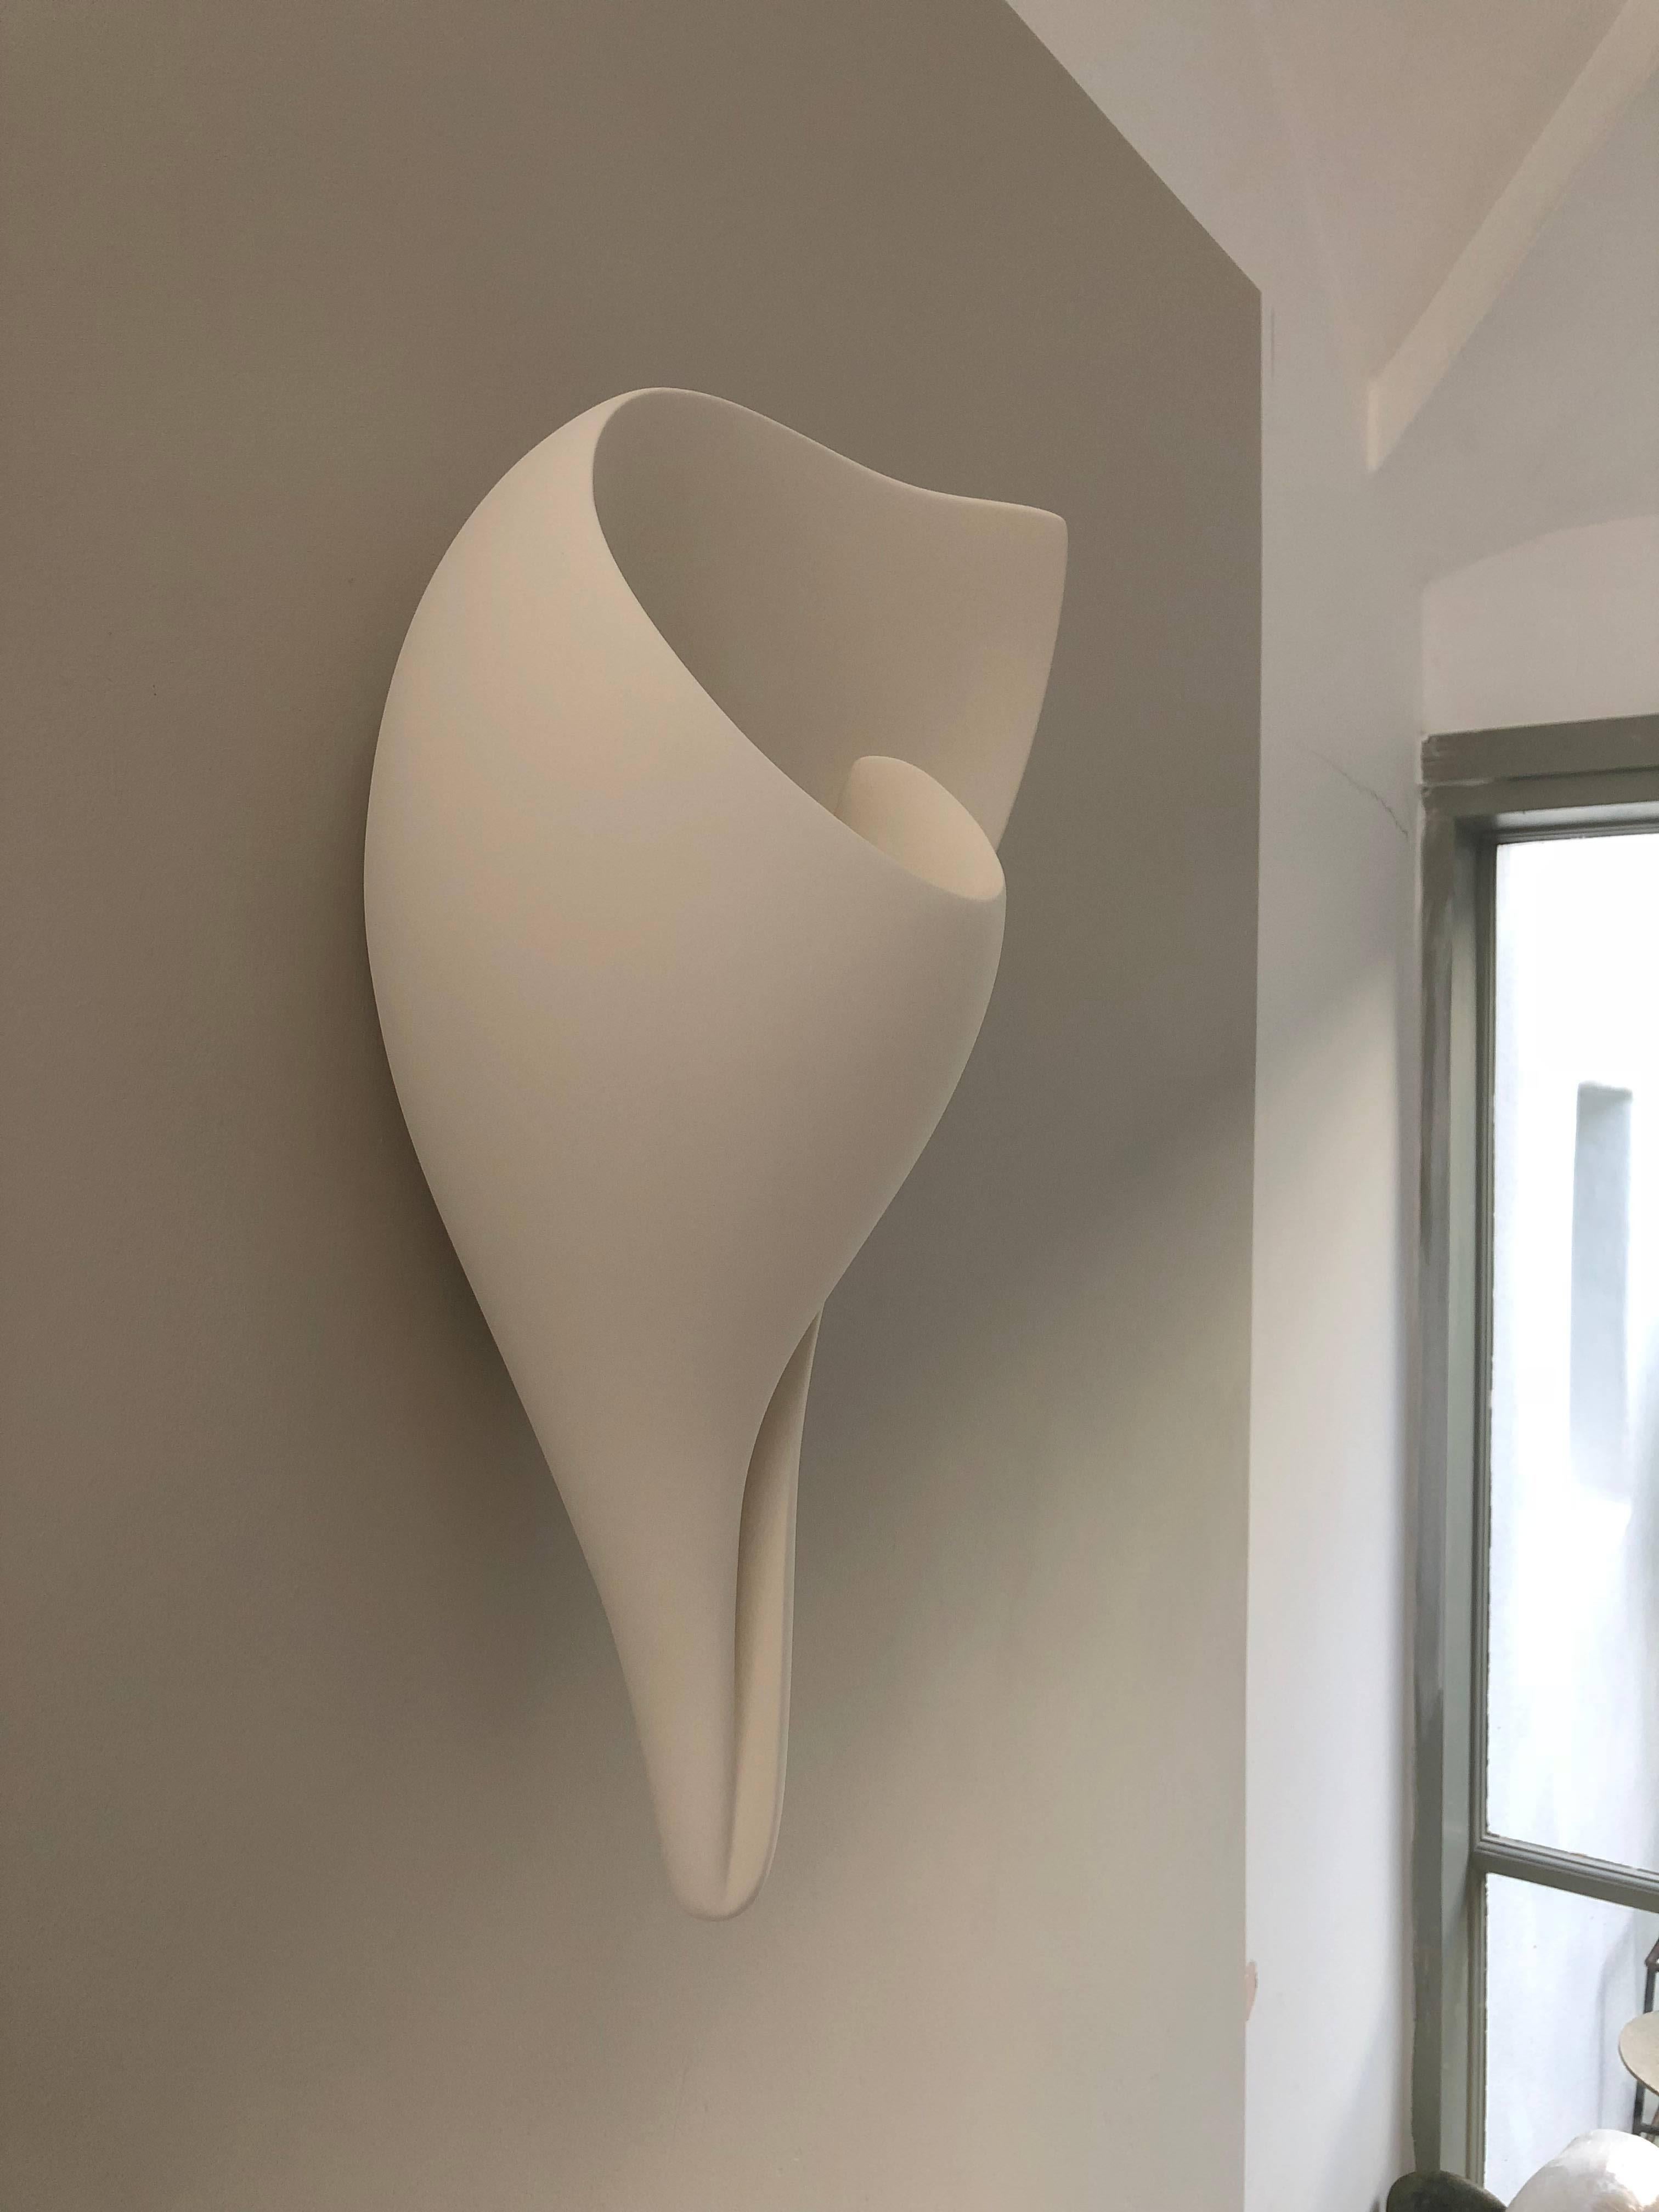 Handmade monumental shell wall-mounted sculpture, in silky smooth white plaster, created by artist Hannah Woodhouse in her London studio. Contemporary design inspired by nature and midcentury European sculpture. Height 19.7